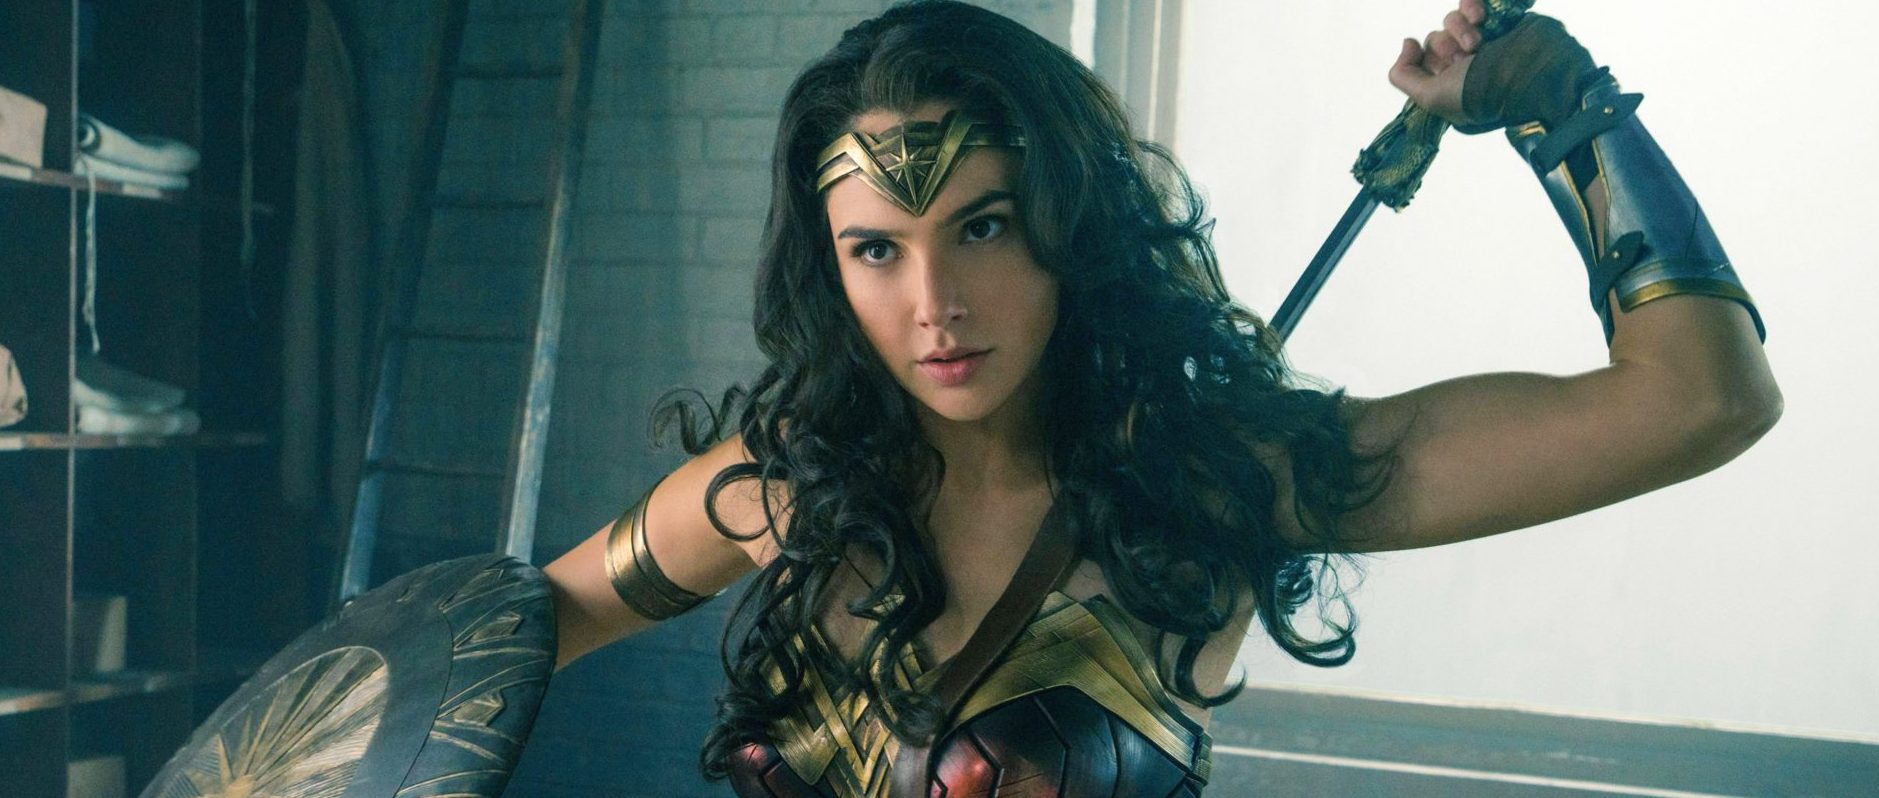 Photo of Review: 'Wonder Woman' is the New DC Movie You've Been Waiting For